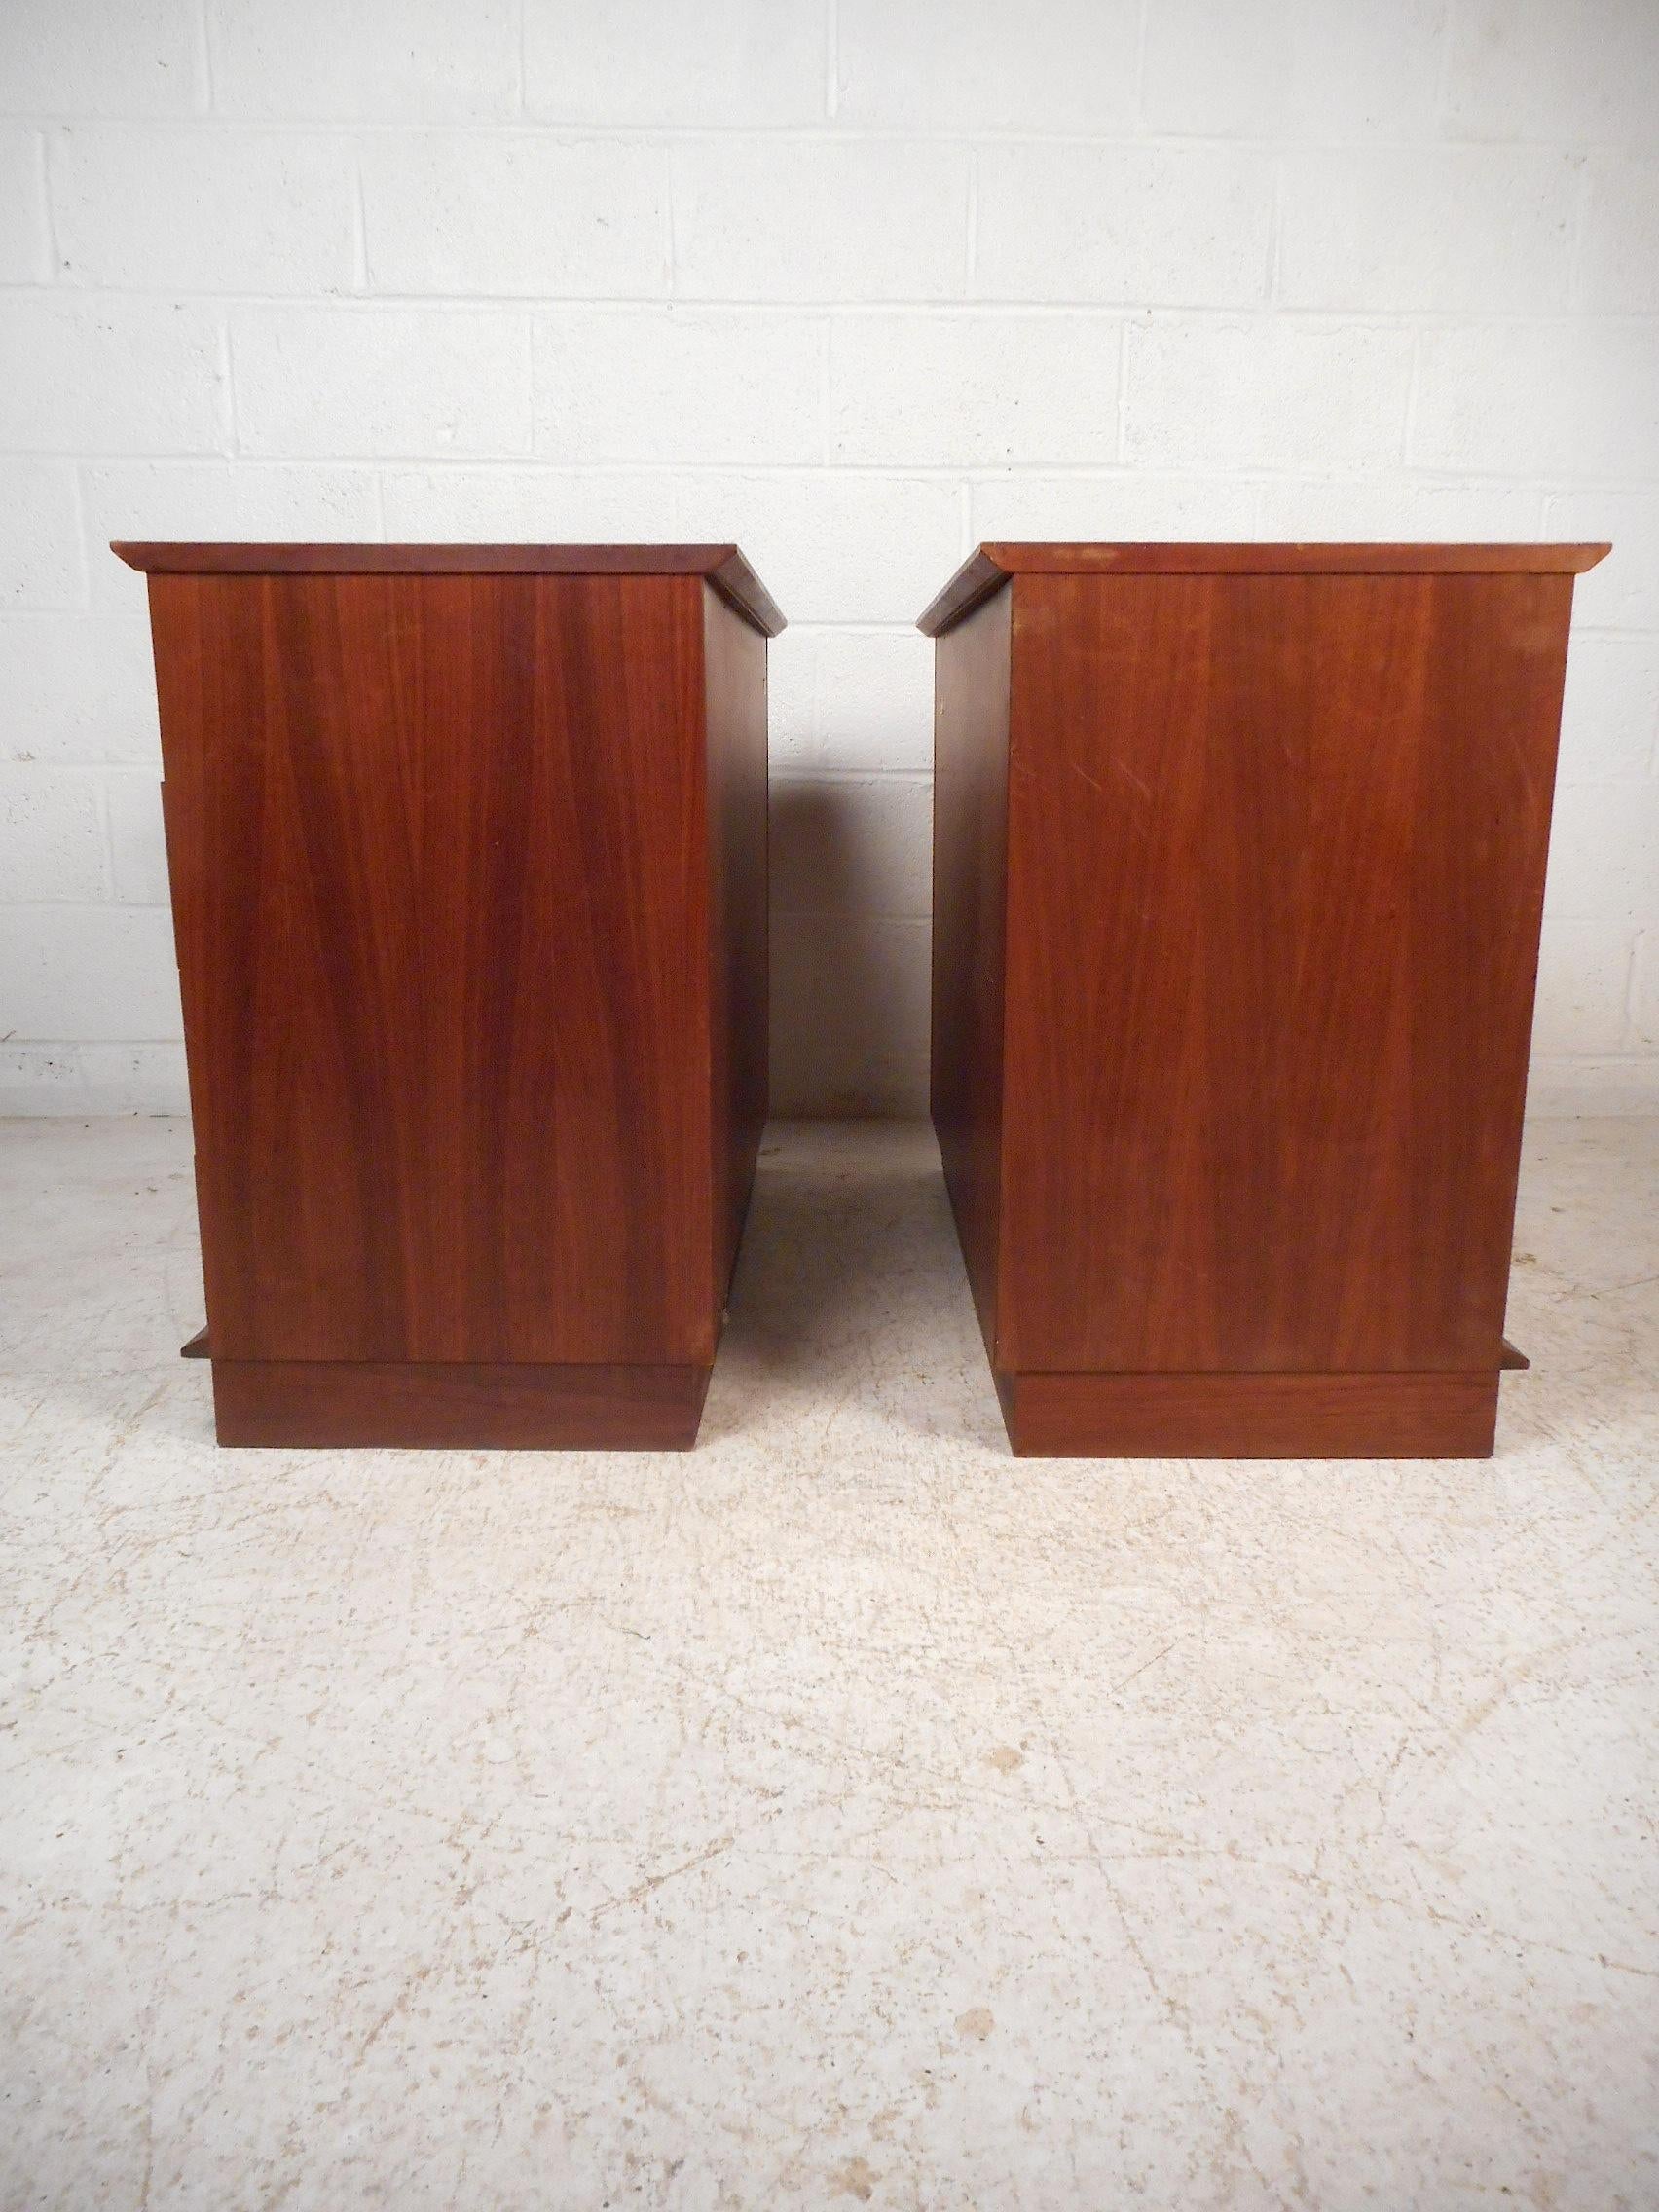 Late 20th Century Midcentury Four-Drawer Commodes, a Pair For Sale